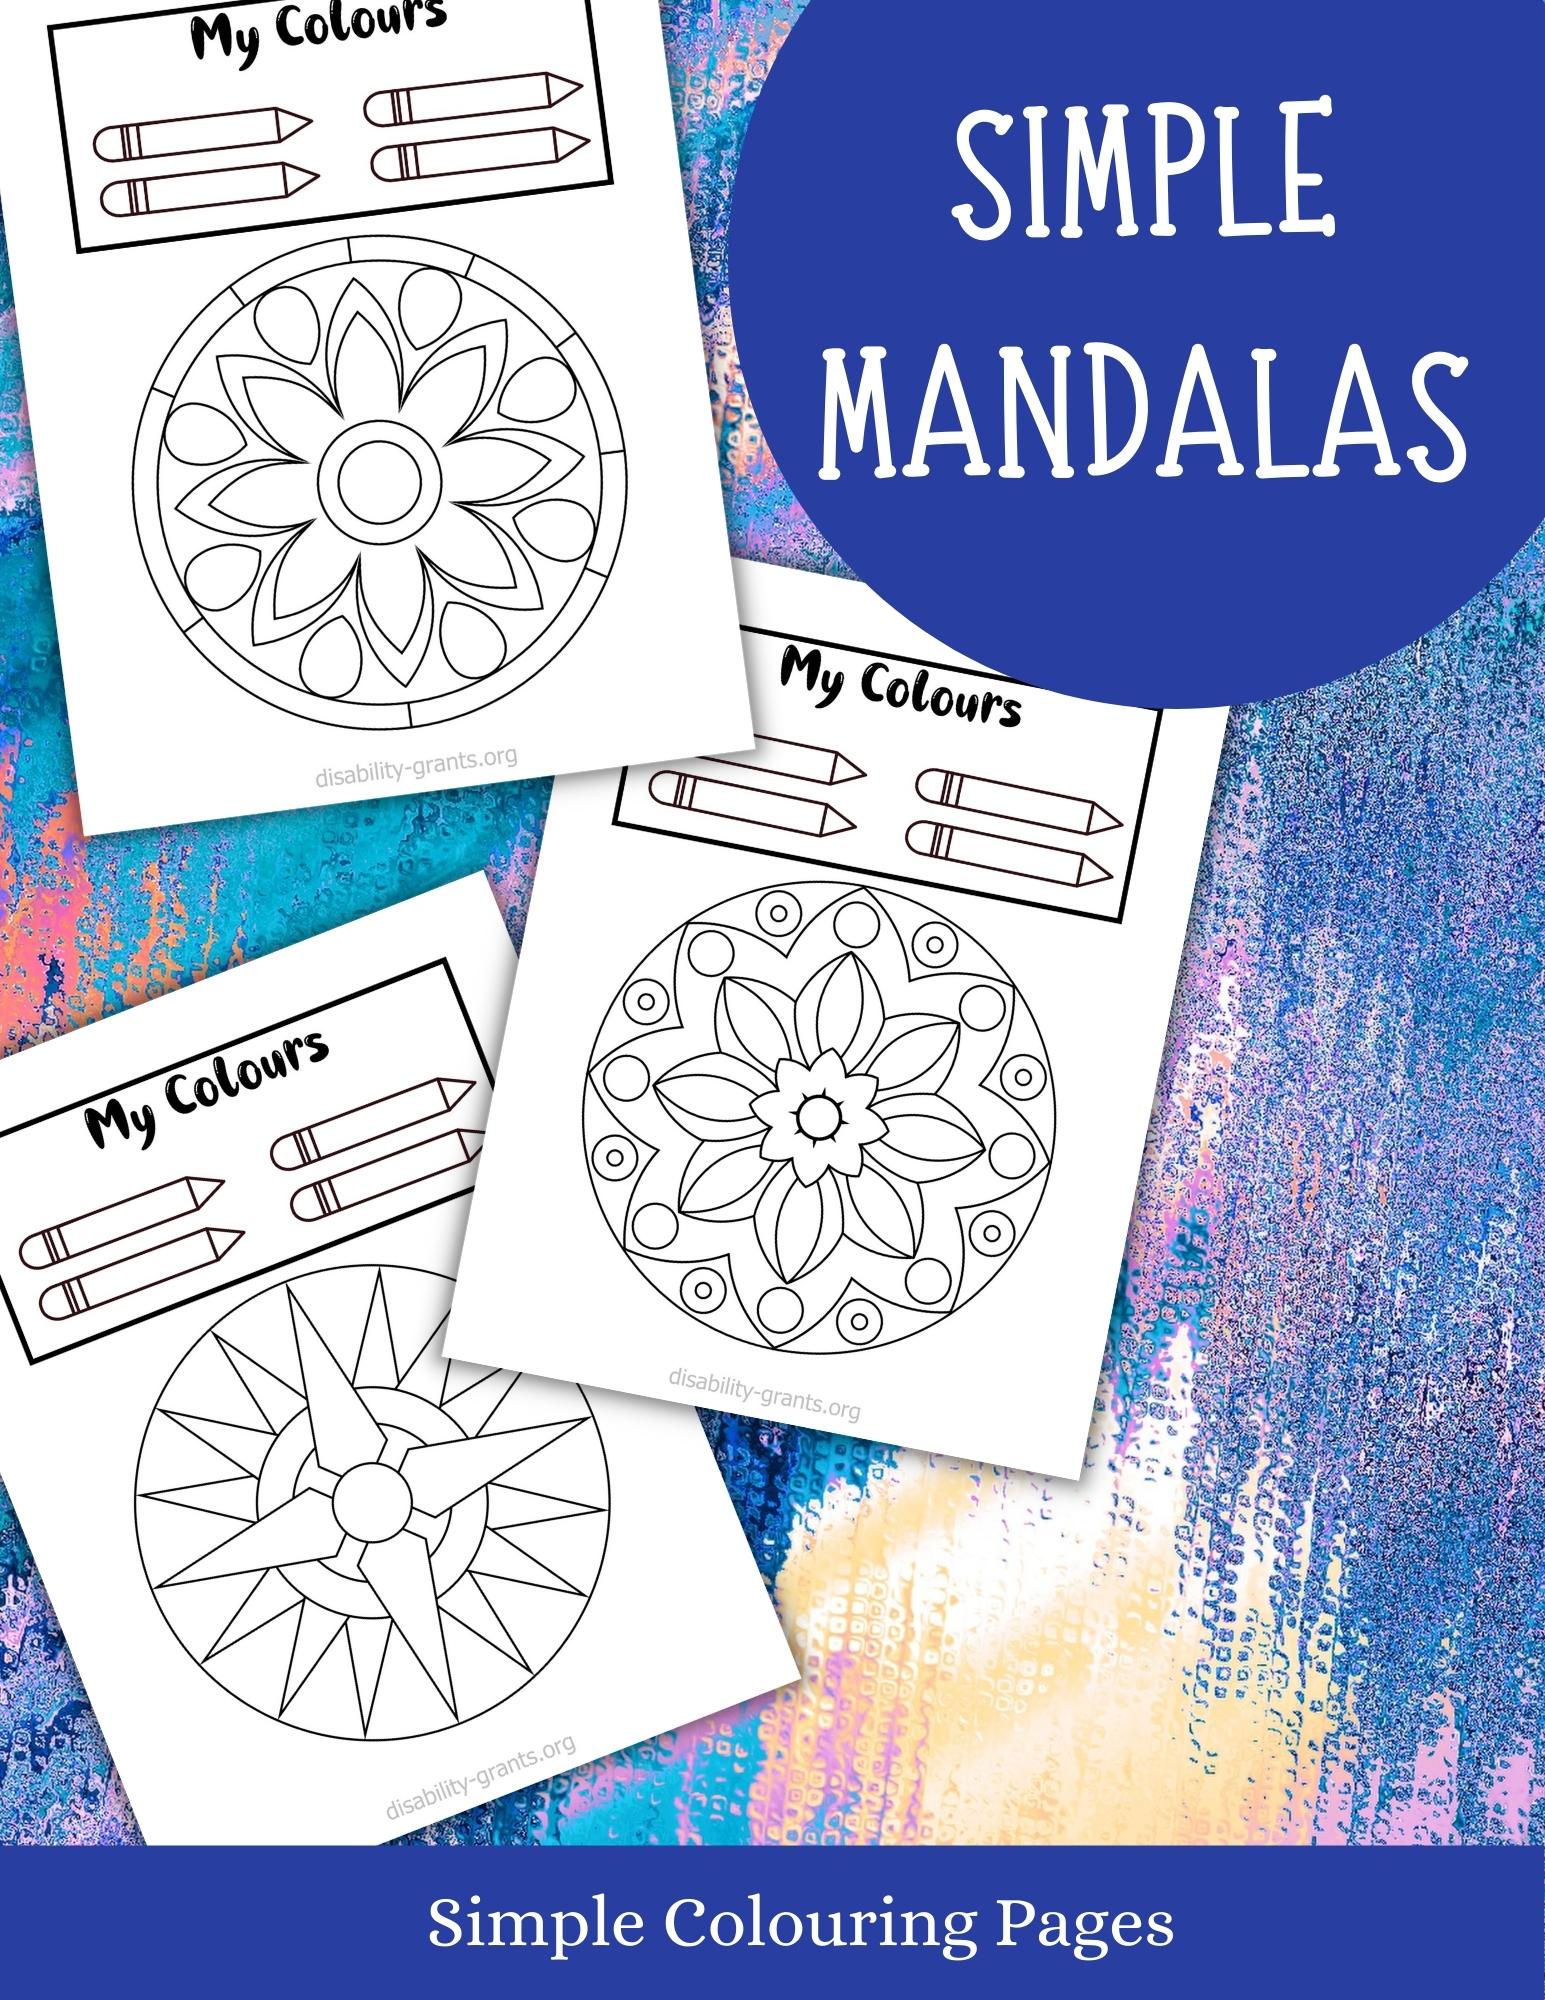 Simple Mandalas: A Simple Adult Coloring Book Easy on the Eyes a